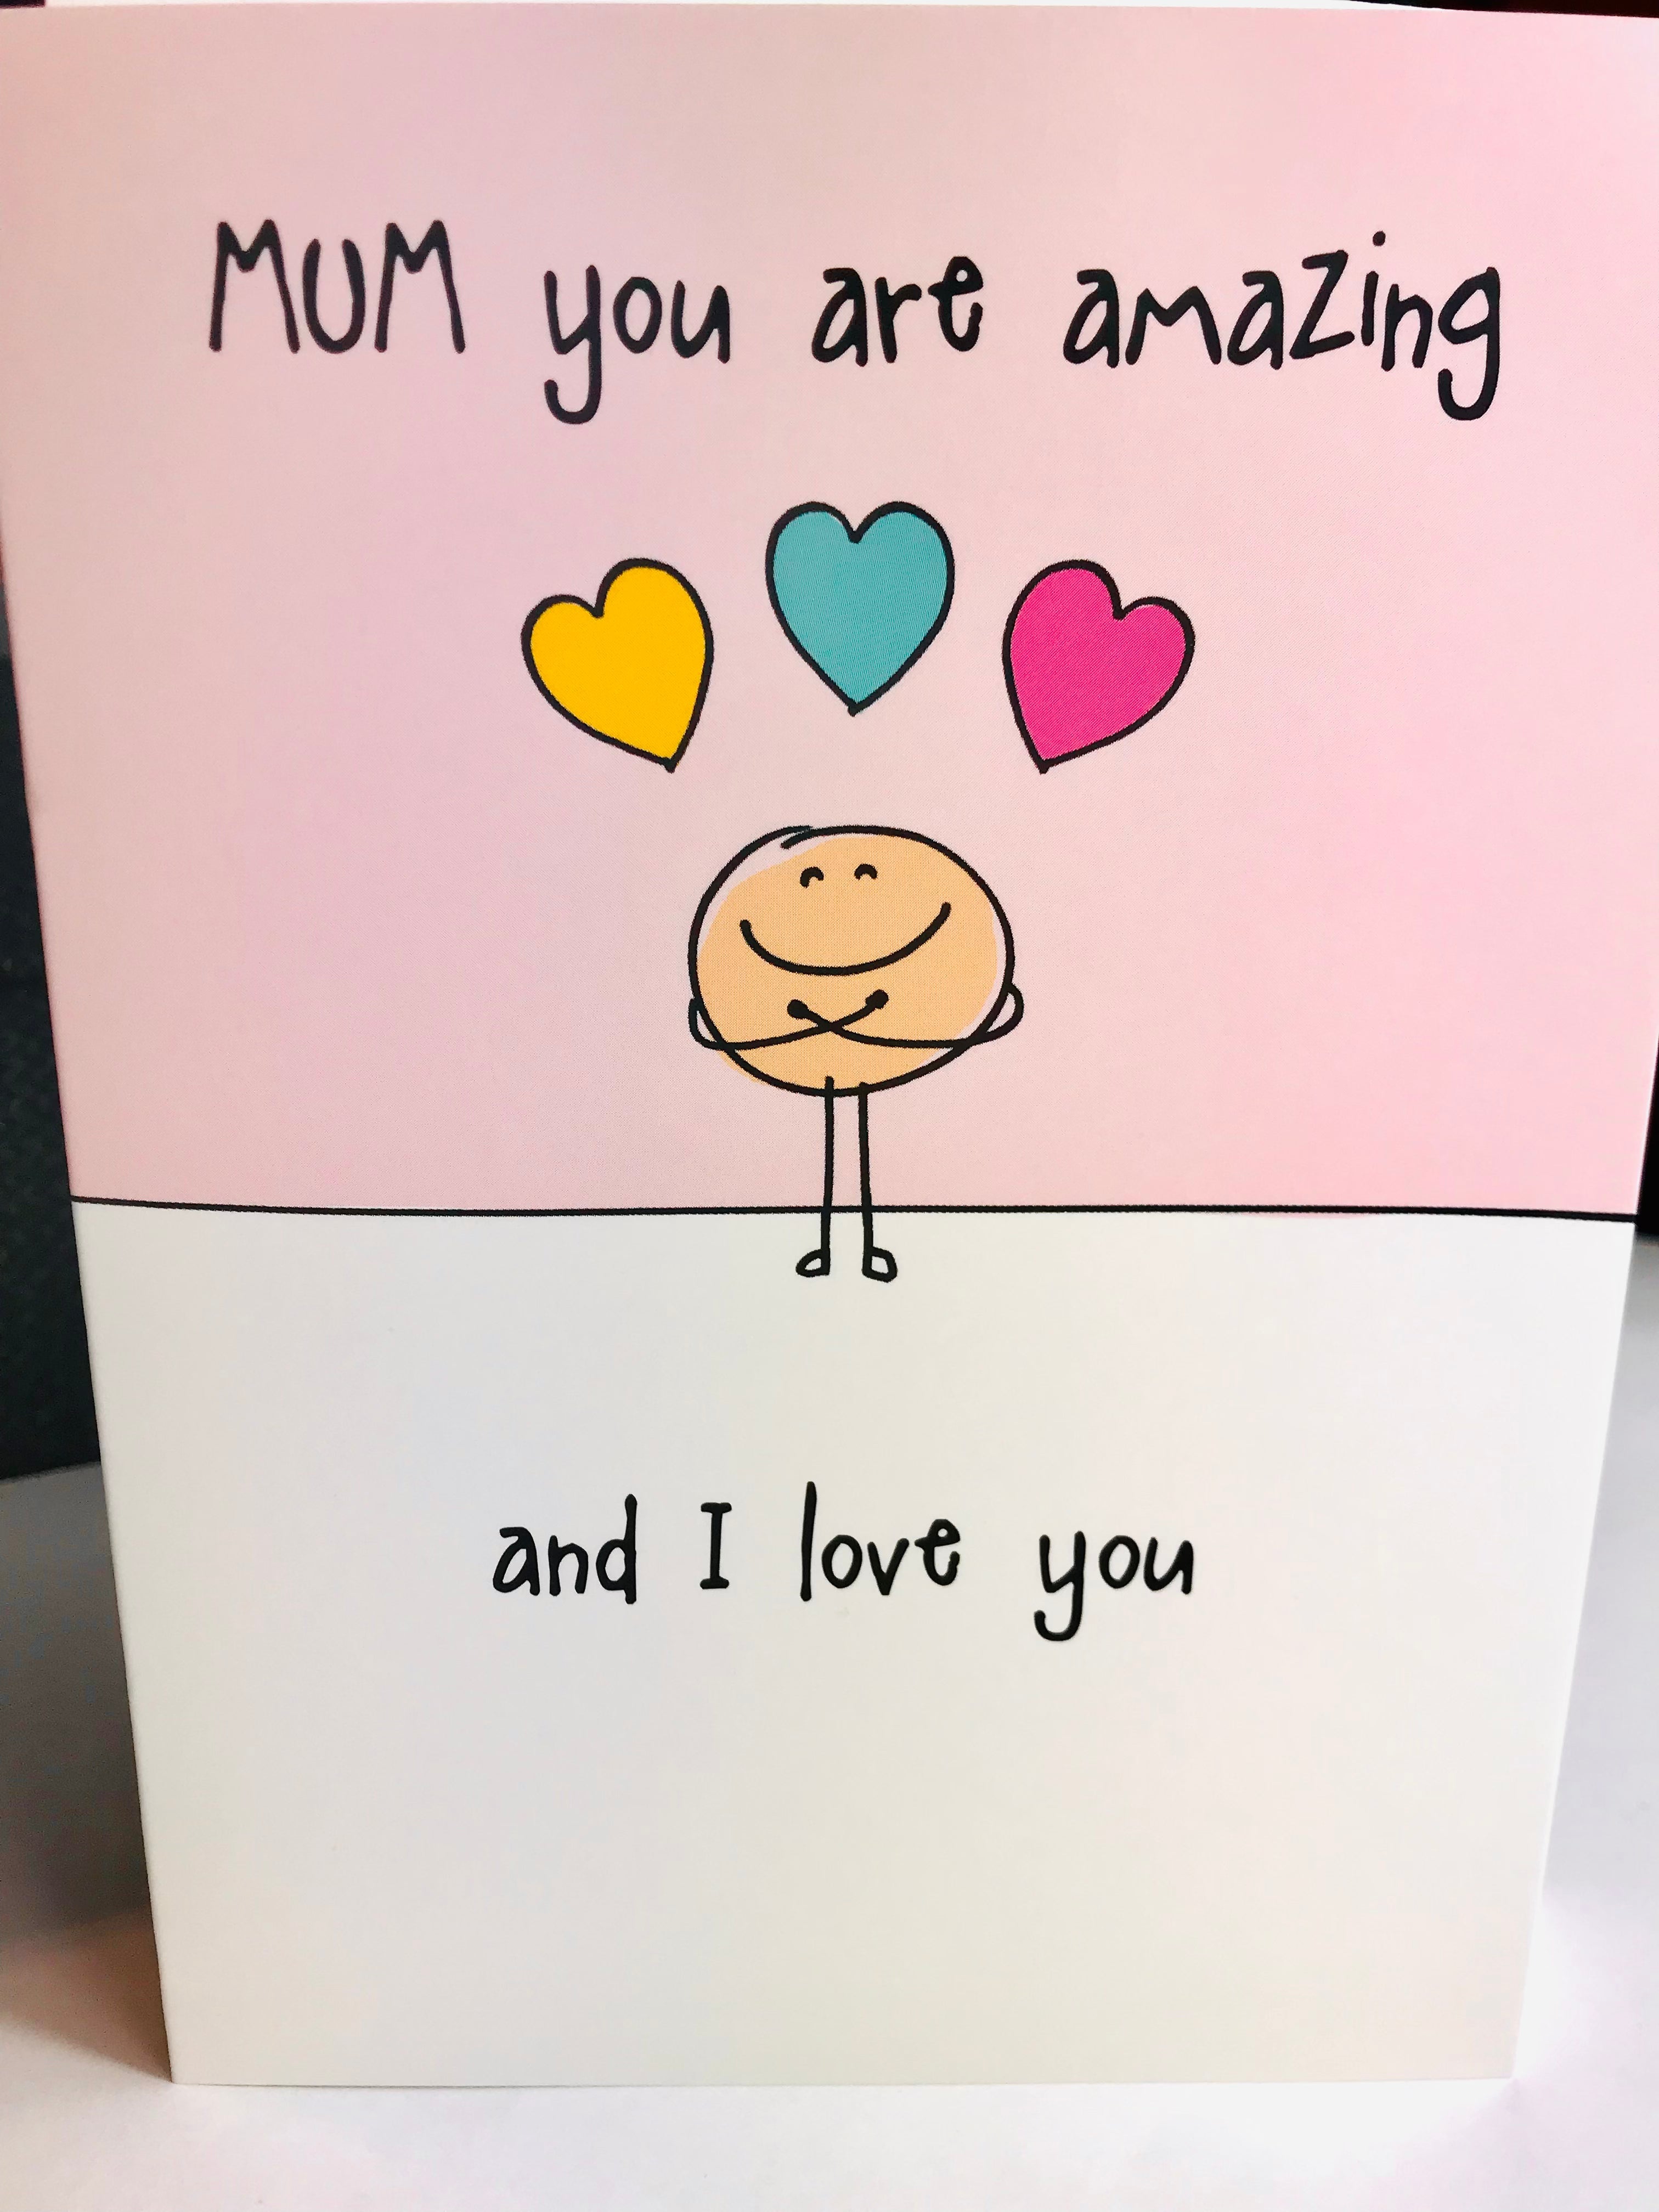 You Are Amazing - The Nancy Smillie Shop - Art, Jewellery & Designer Gifts Glasgow